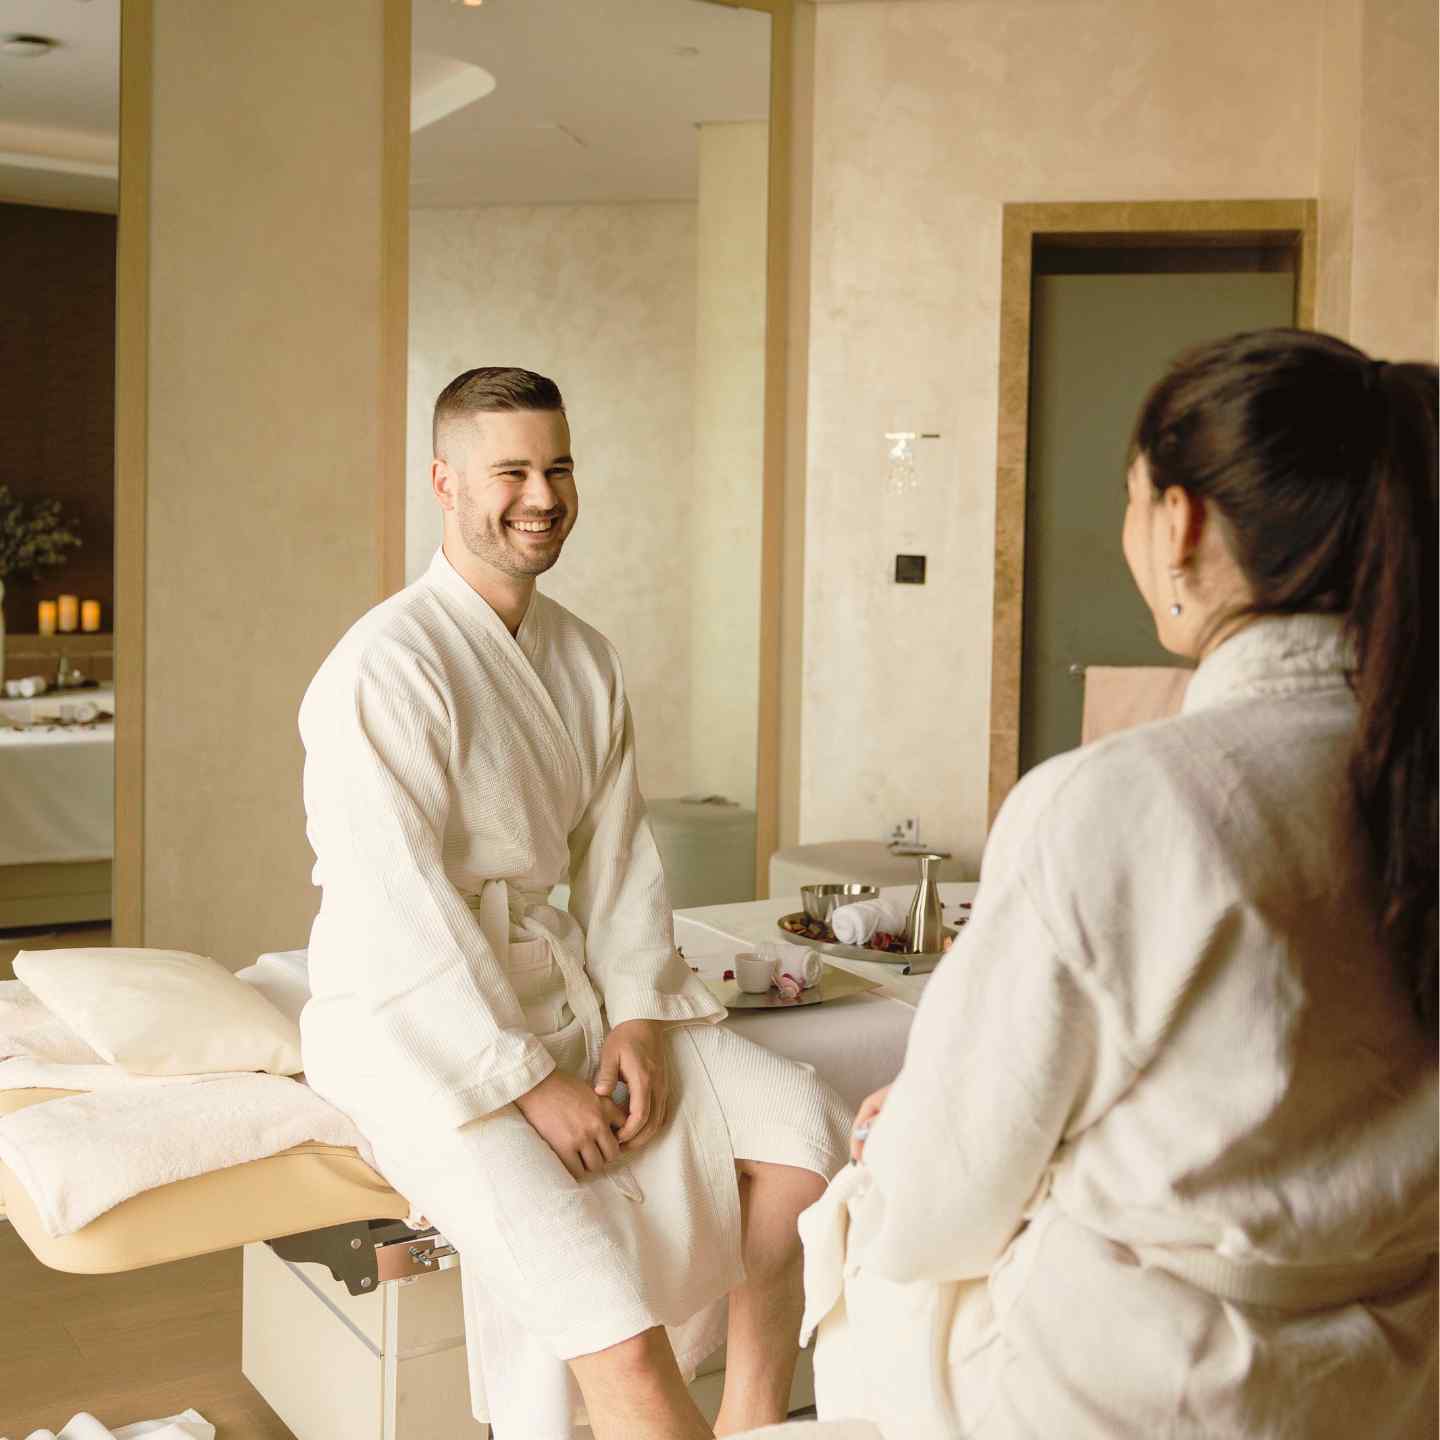 Man and woman in white robes sitting on massage tables smiling at each other